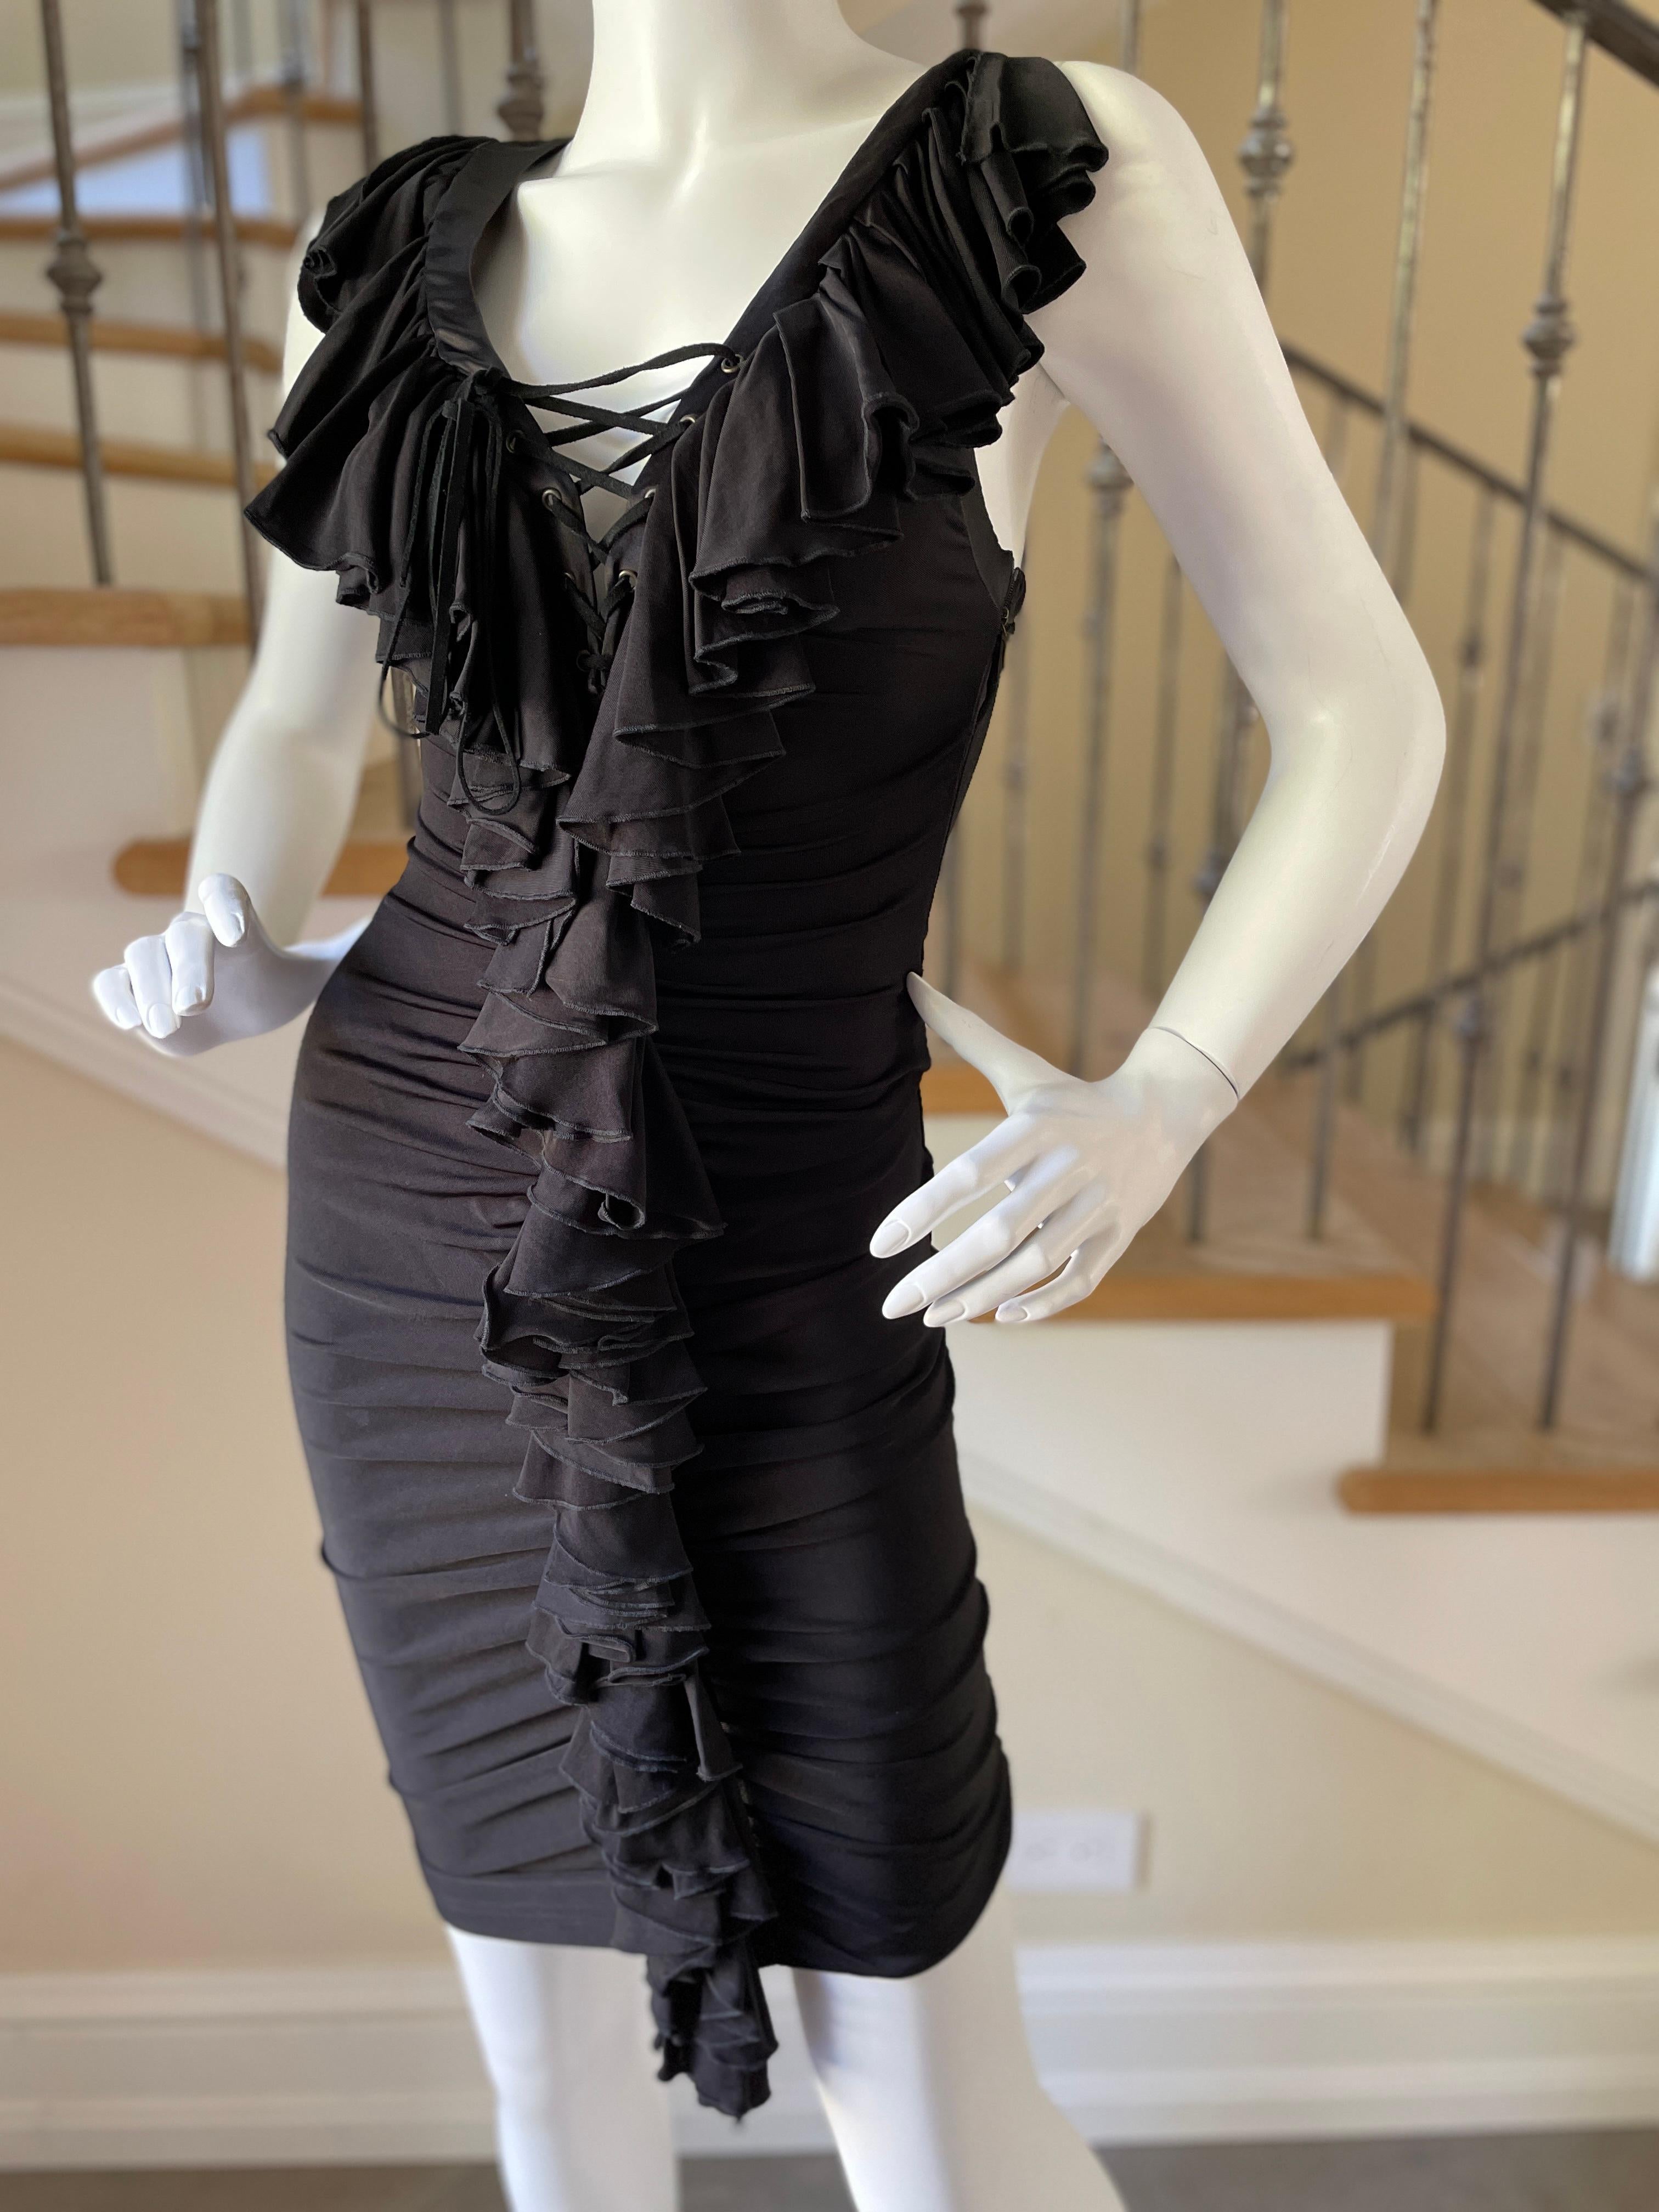 Black Just Cavalli Vintage Ruffled Corset Lace Cocktail Dress by Roberto Cavalli For Sale